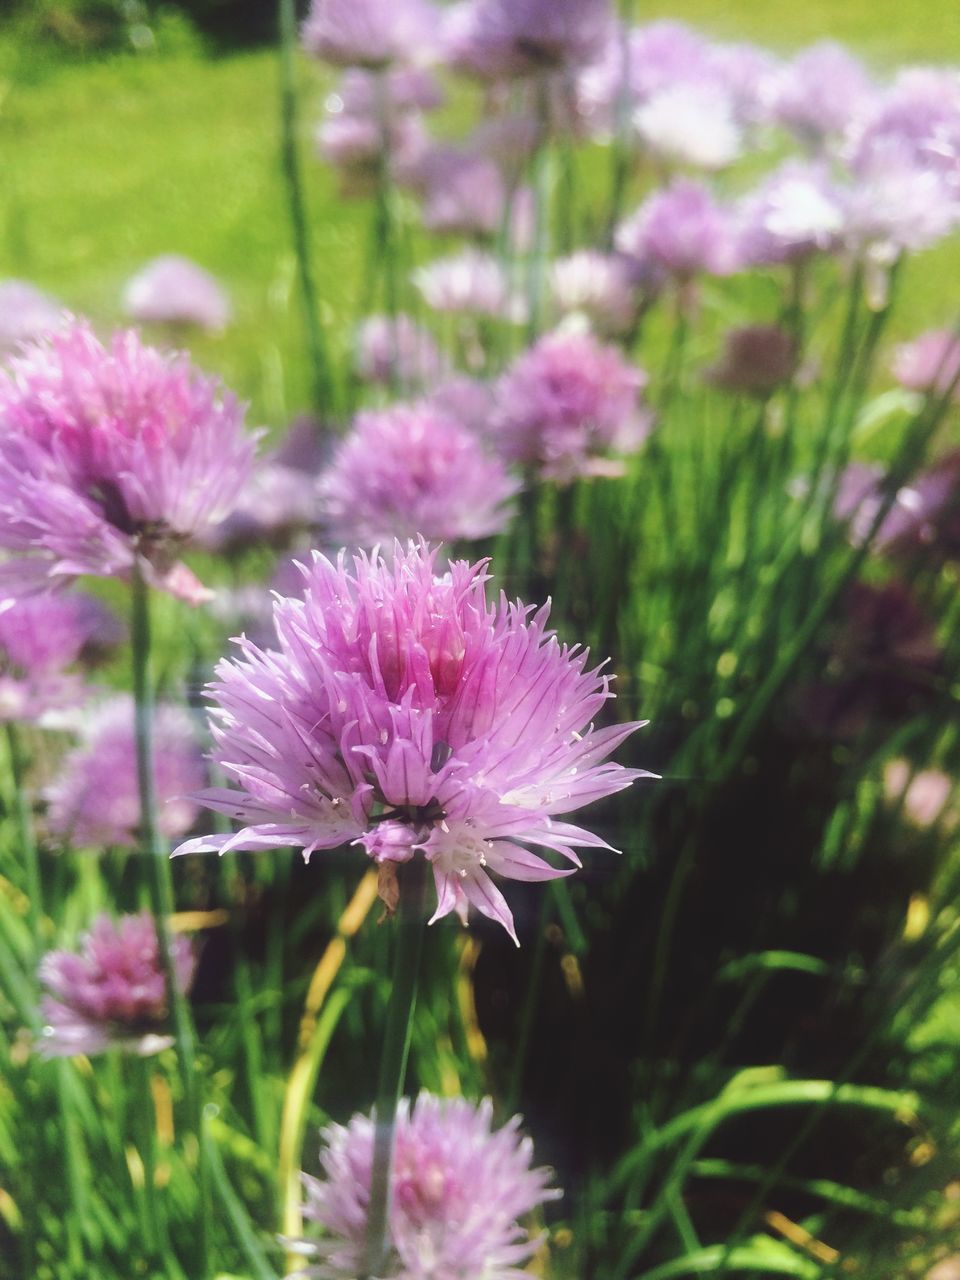 flowering plant, flower, freshness, plant, fragility, vulnerability, beauty in nature, pink color, growth, petal, nature, close-up, inflorescence, flower head, selective focus, day, no people, field, purple, land, outdoors